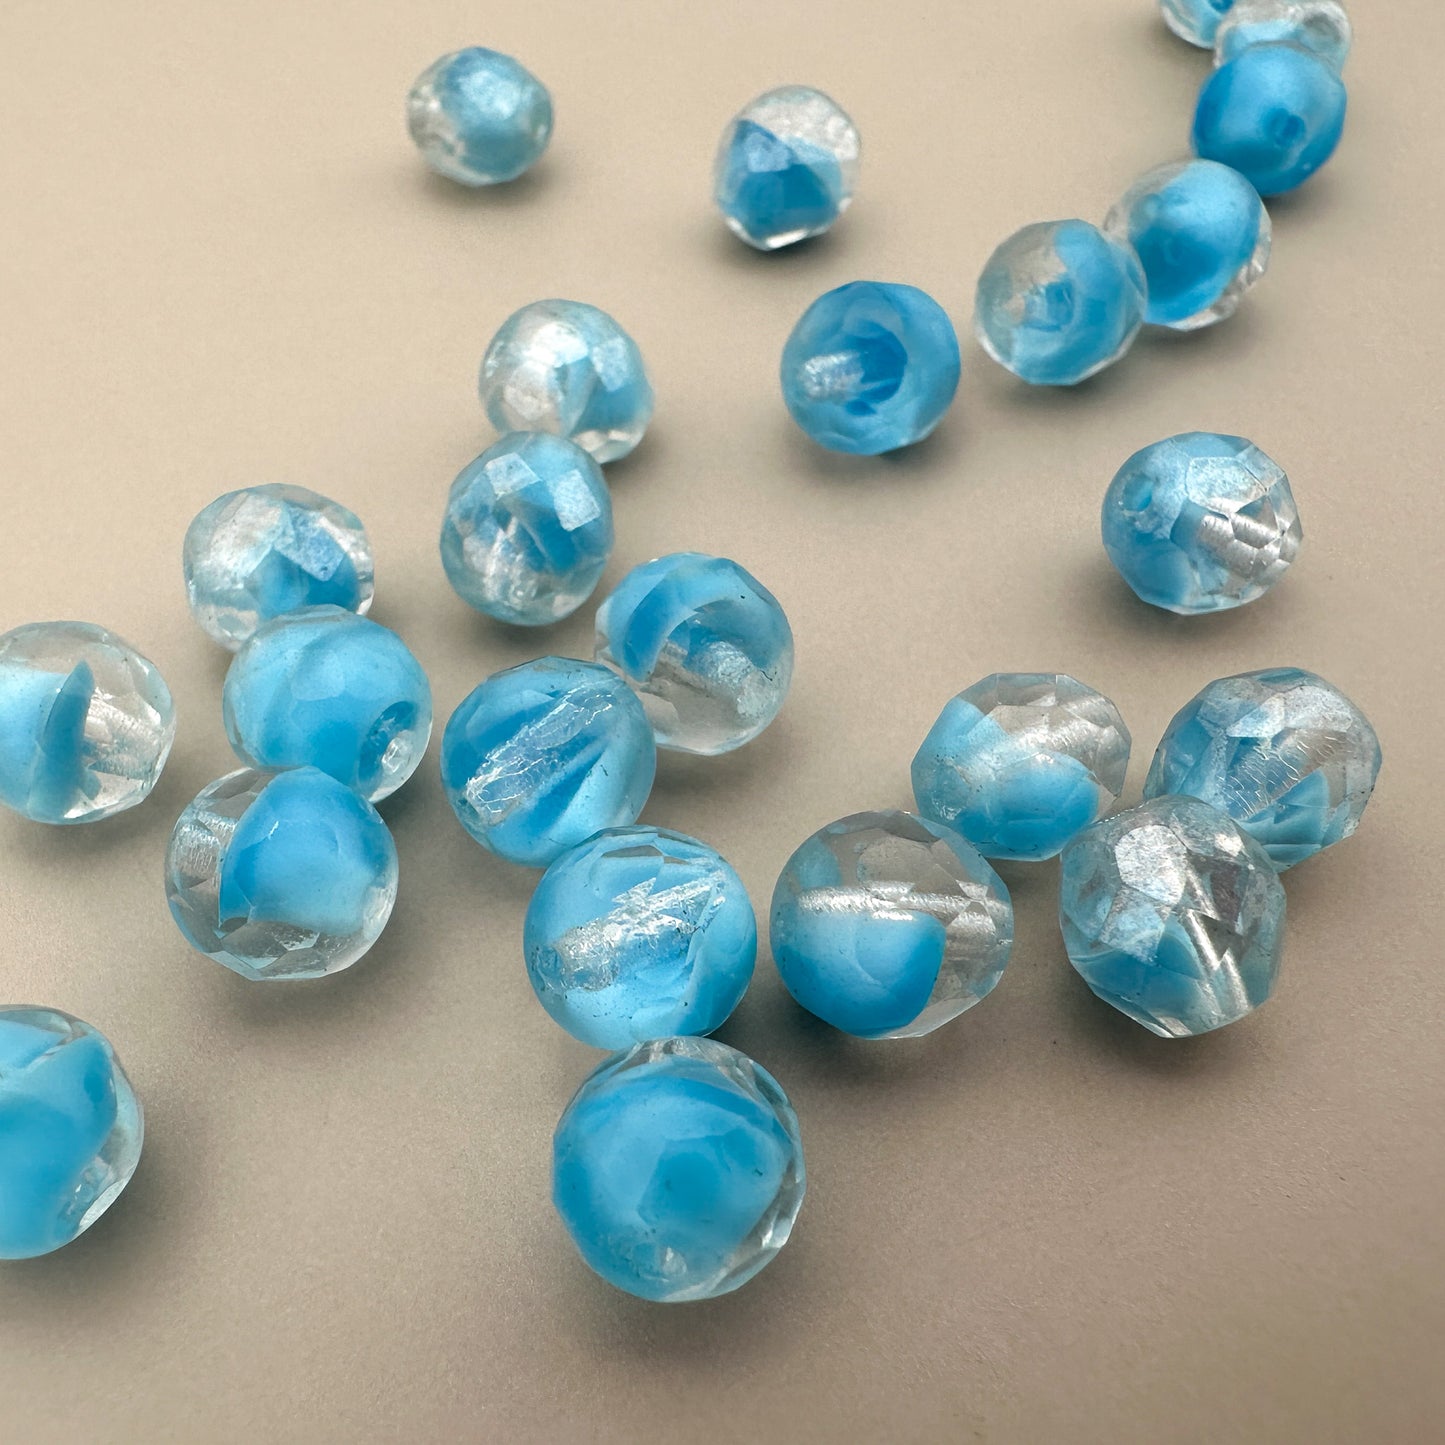 Vintage German 7x8mm Faceted Clear with Light Blue Core Oval Glass Bead - 4 pcs. (Z312)